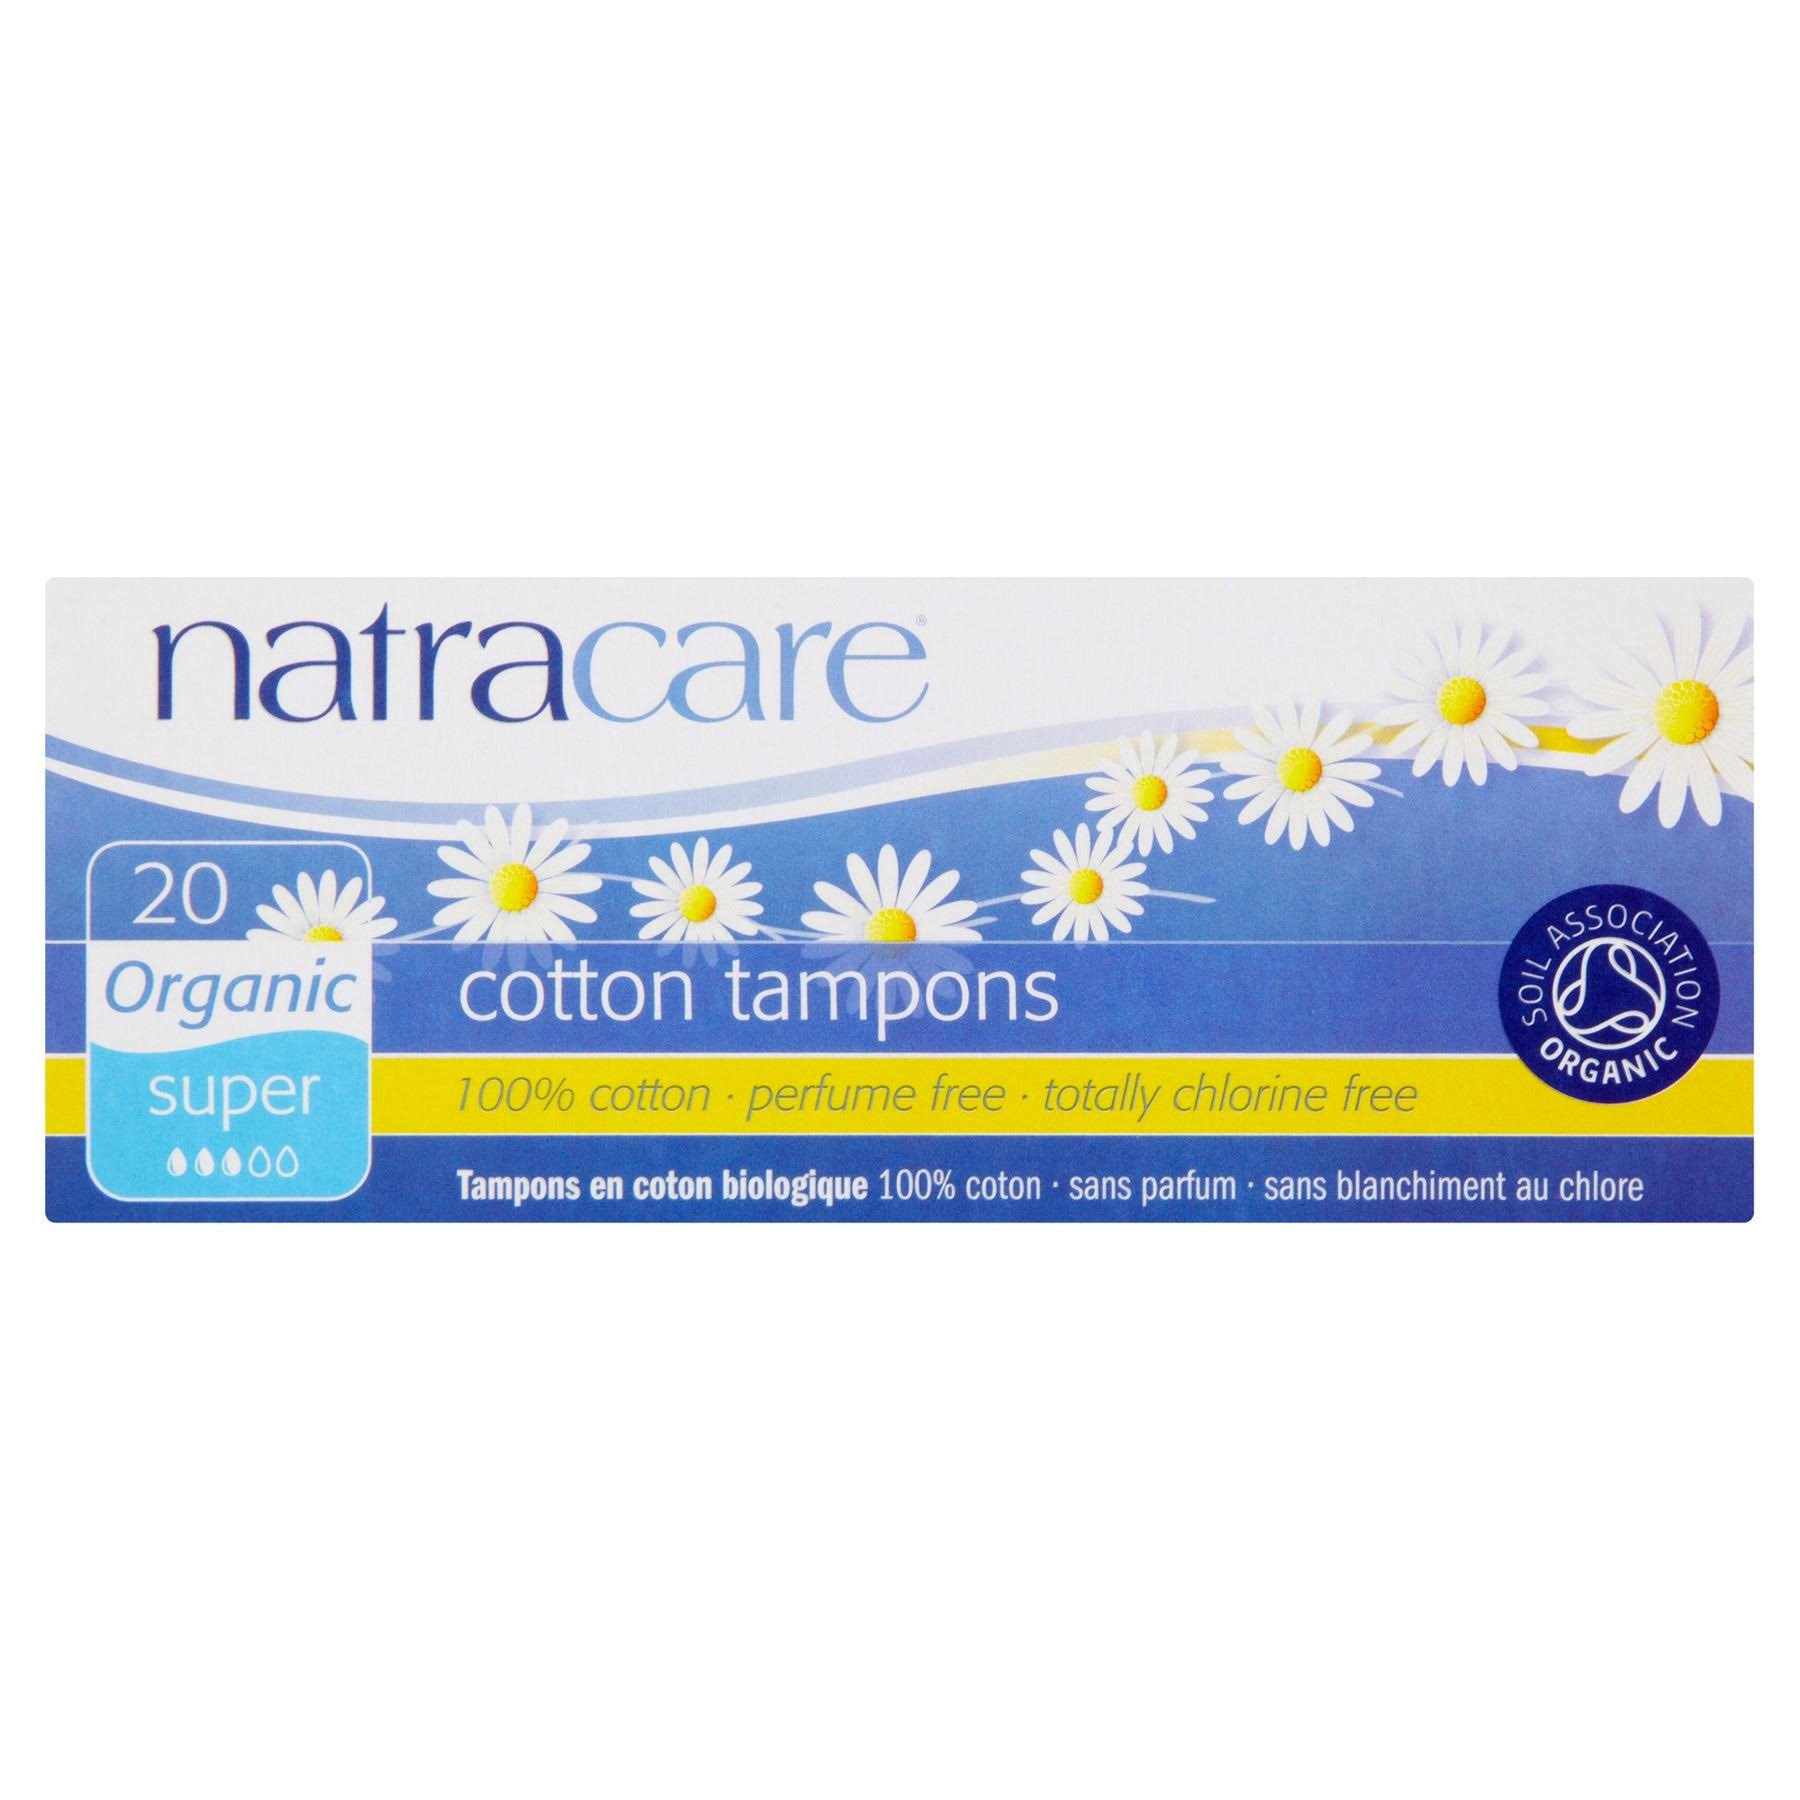 Natracare Tampons - Organic, All Cotton Tampons, Super, 20 Pack